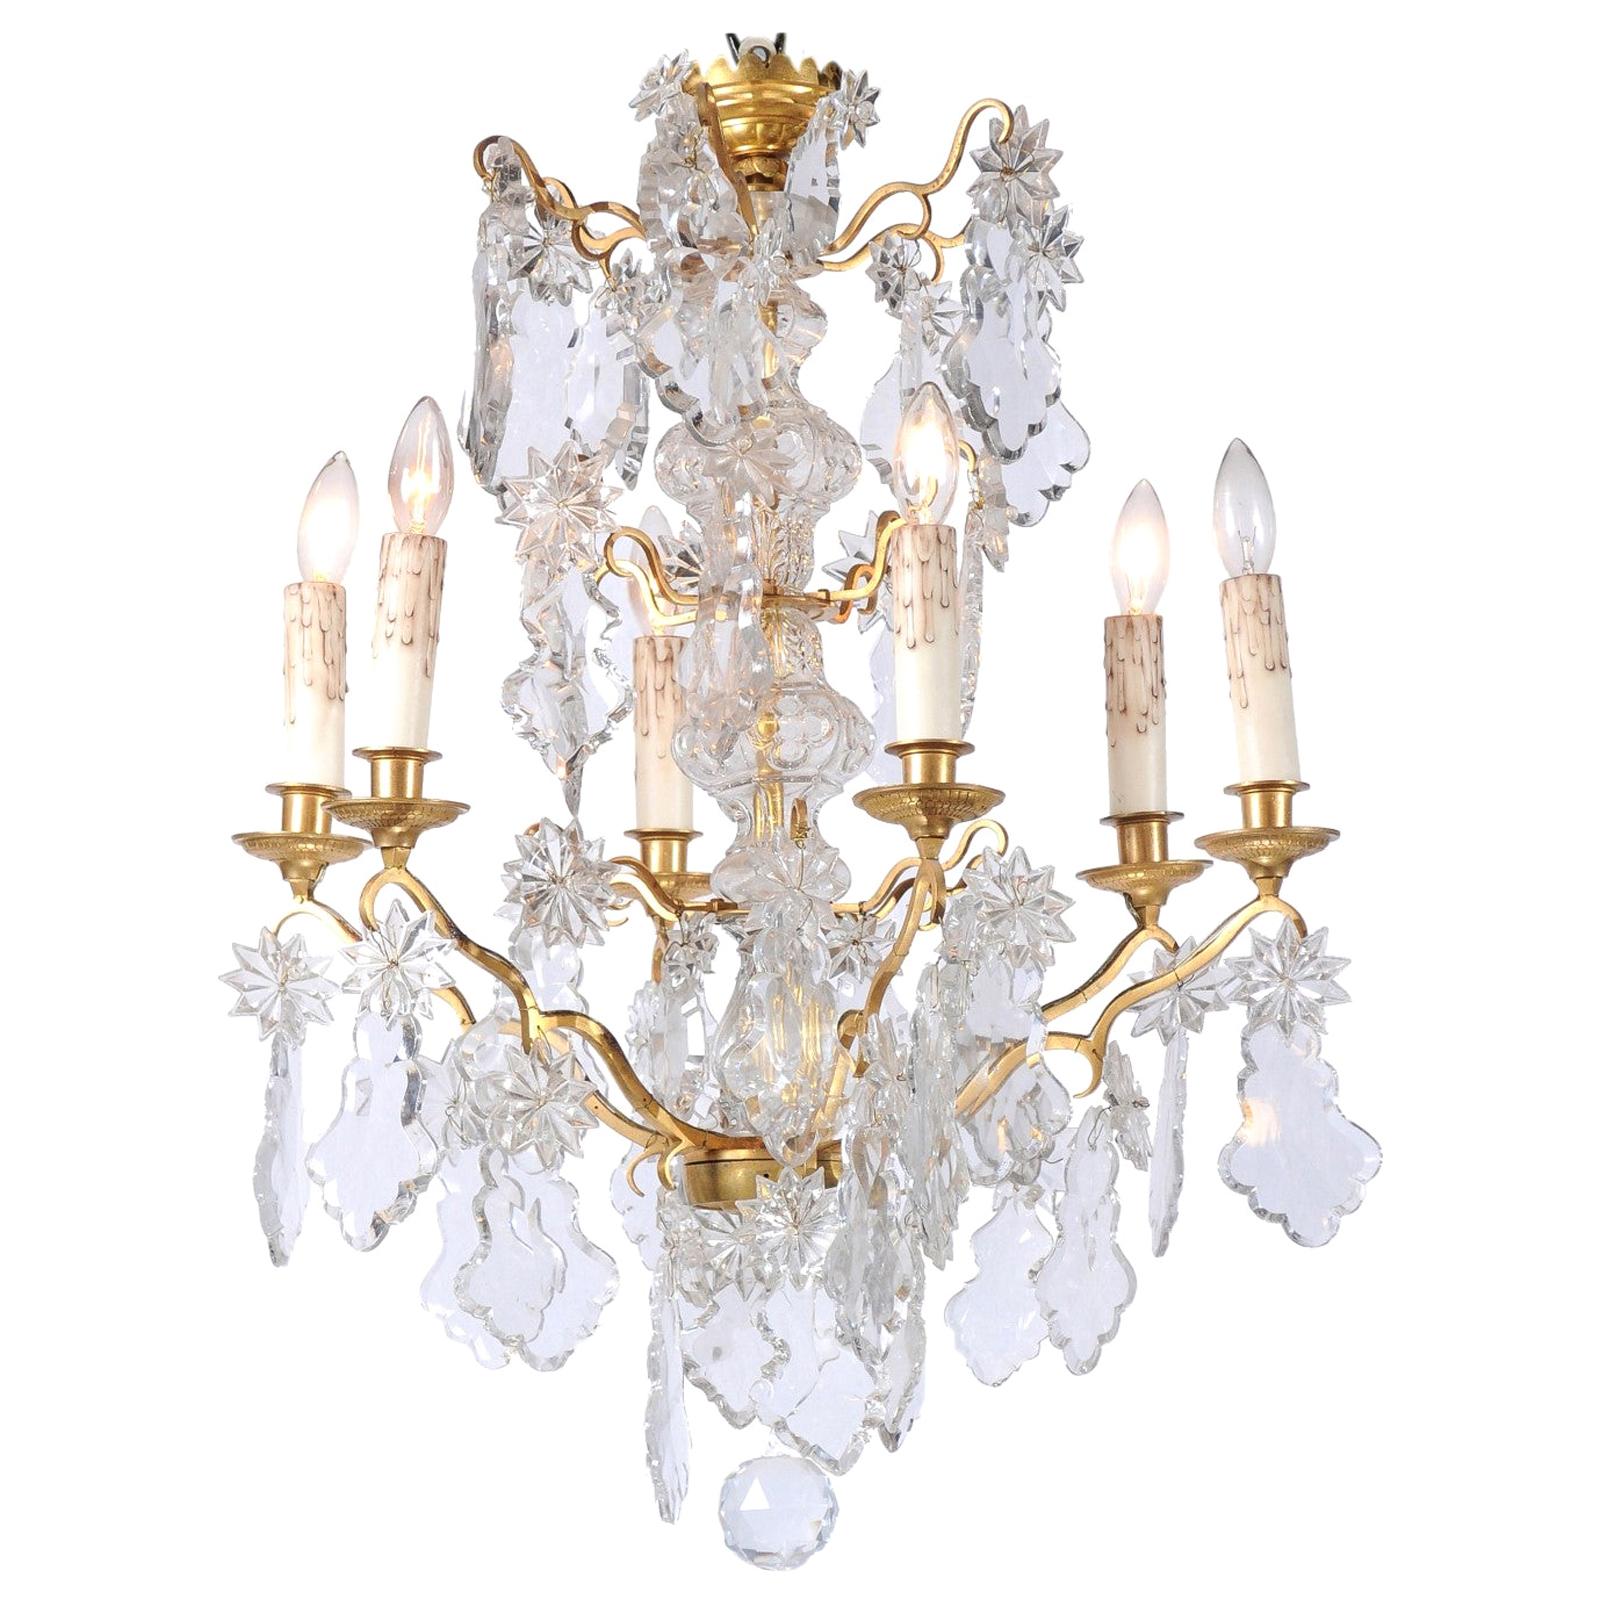 1850s Napoleon III Six-Light Crystal and Brass Chandelier with Pendeloques For Sale